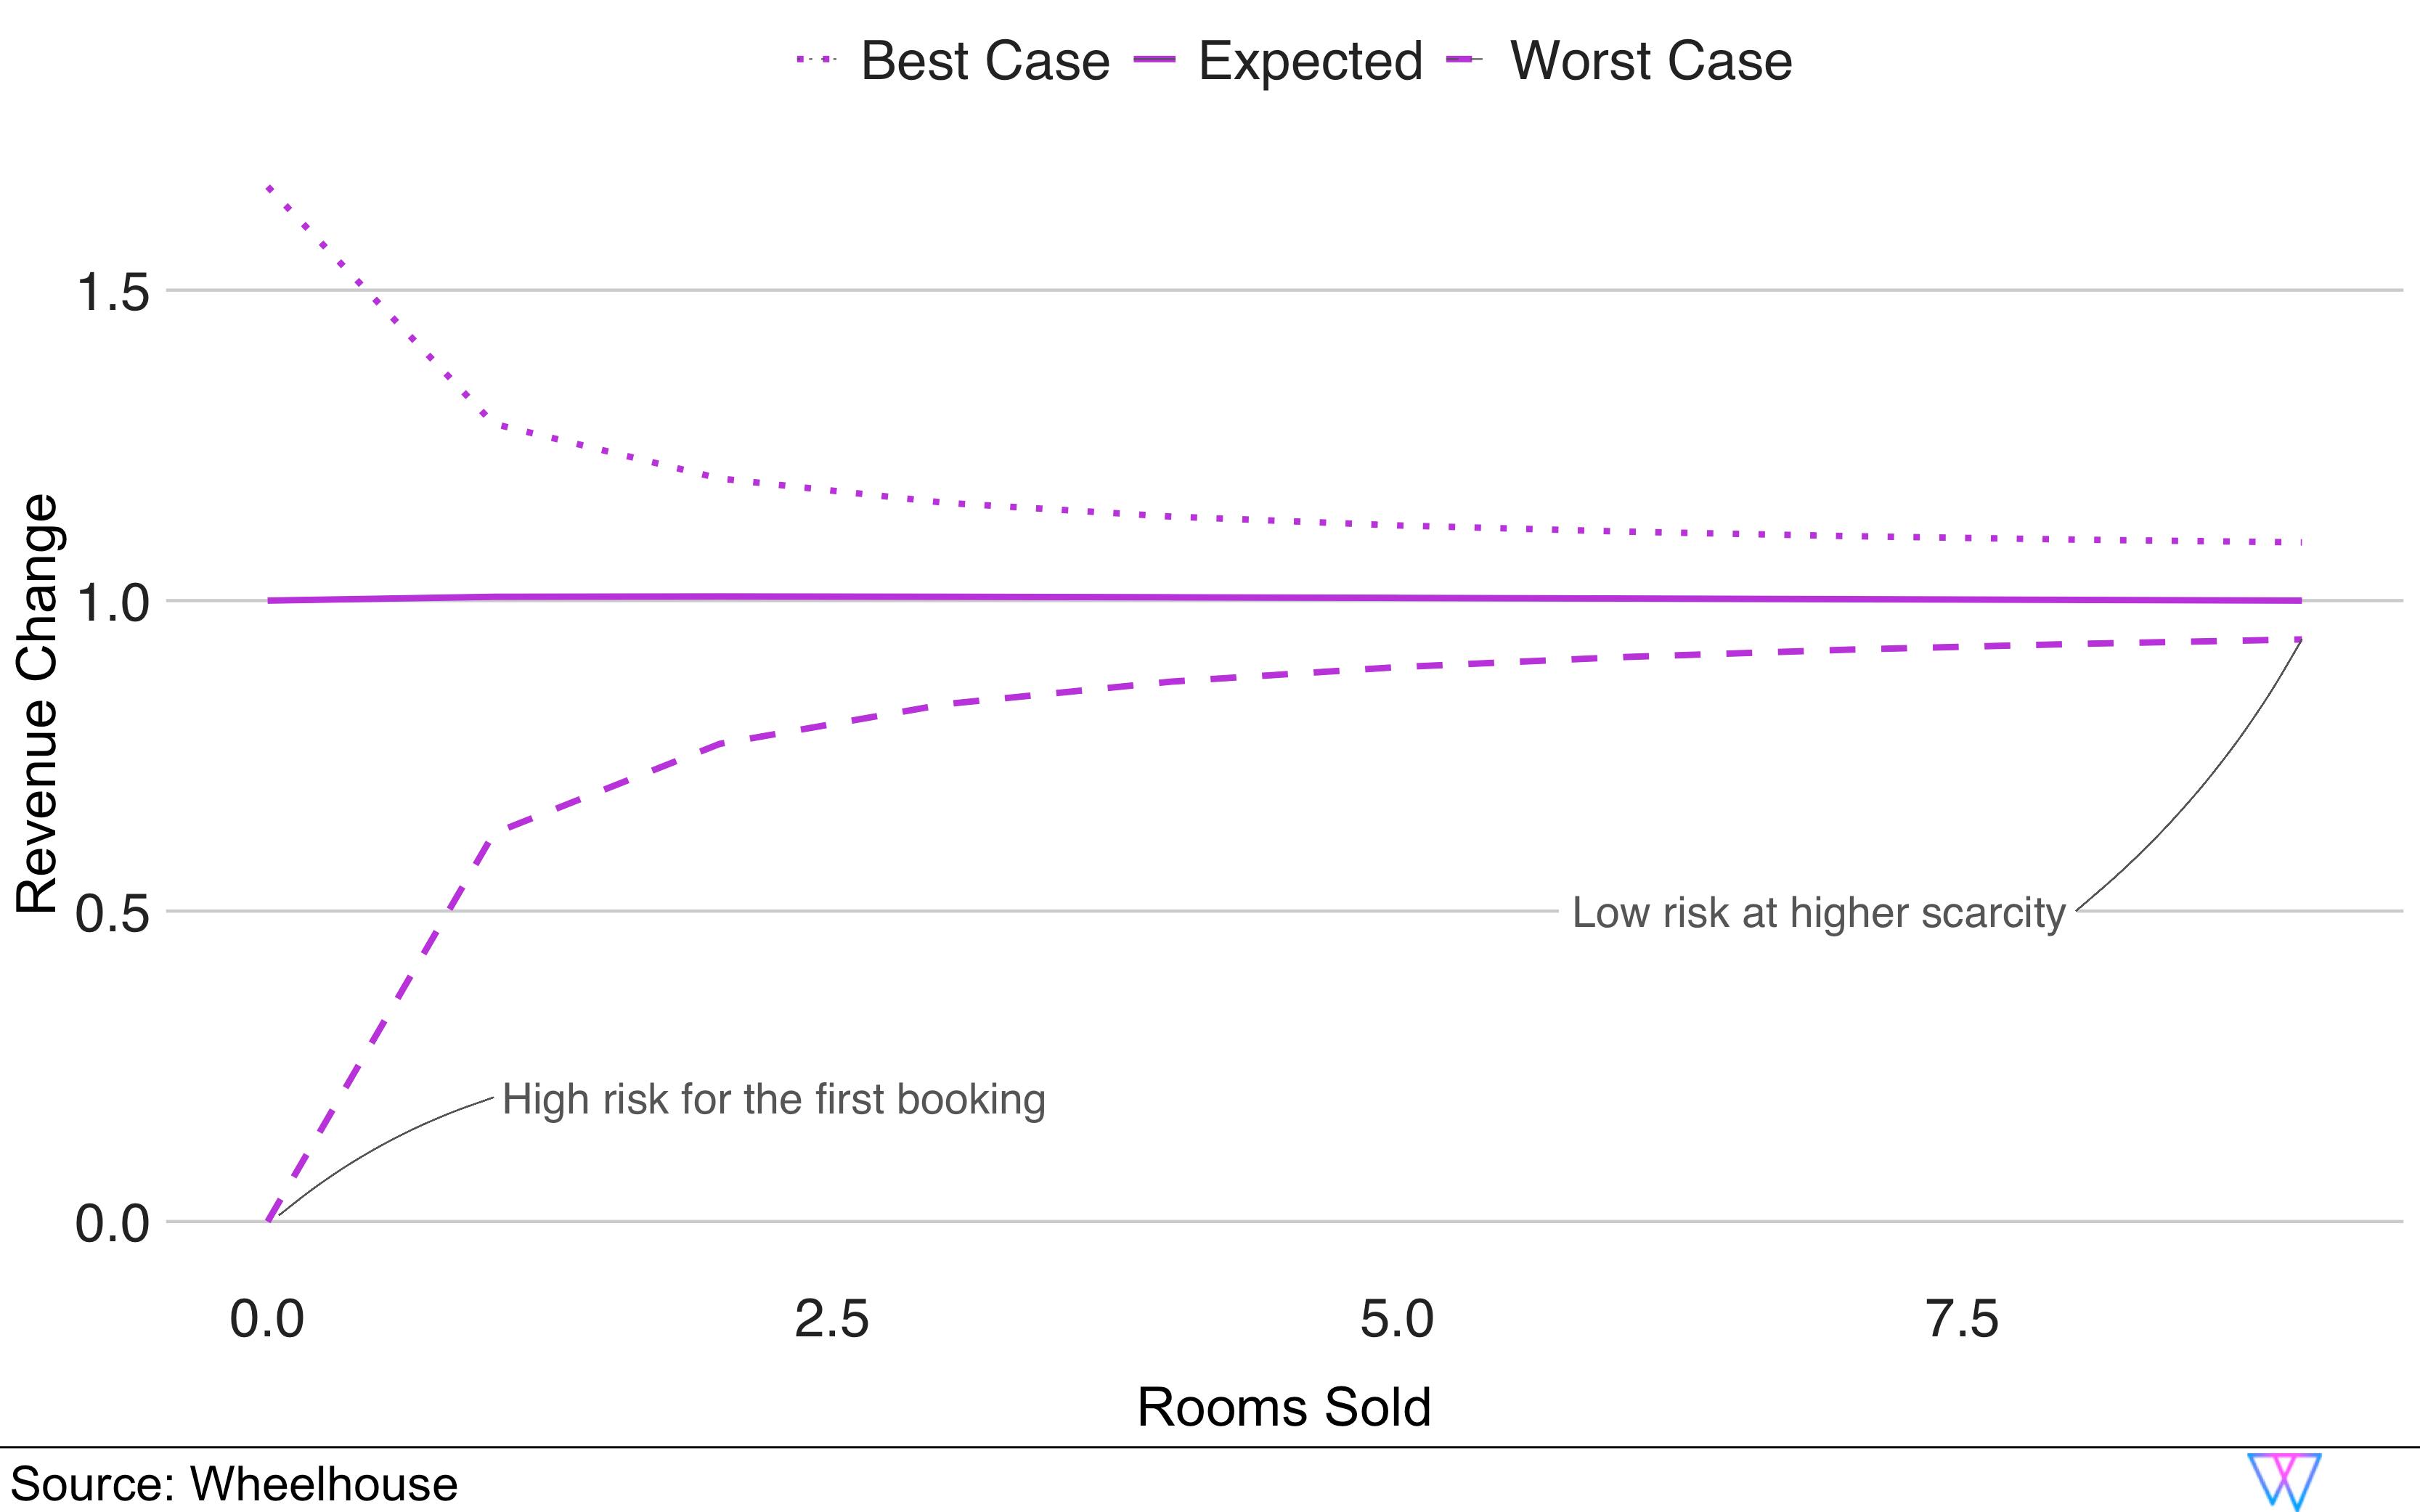 Revenue change by rooms sold as best case, expected and worst case